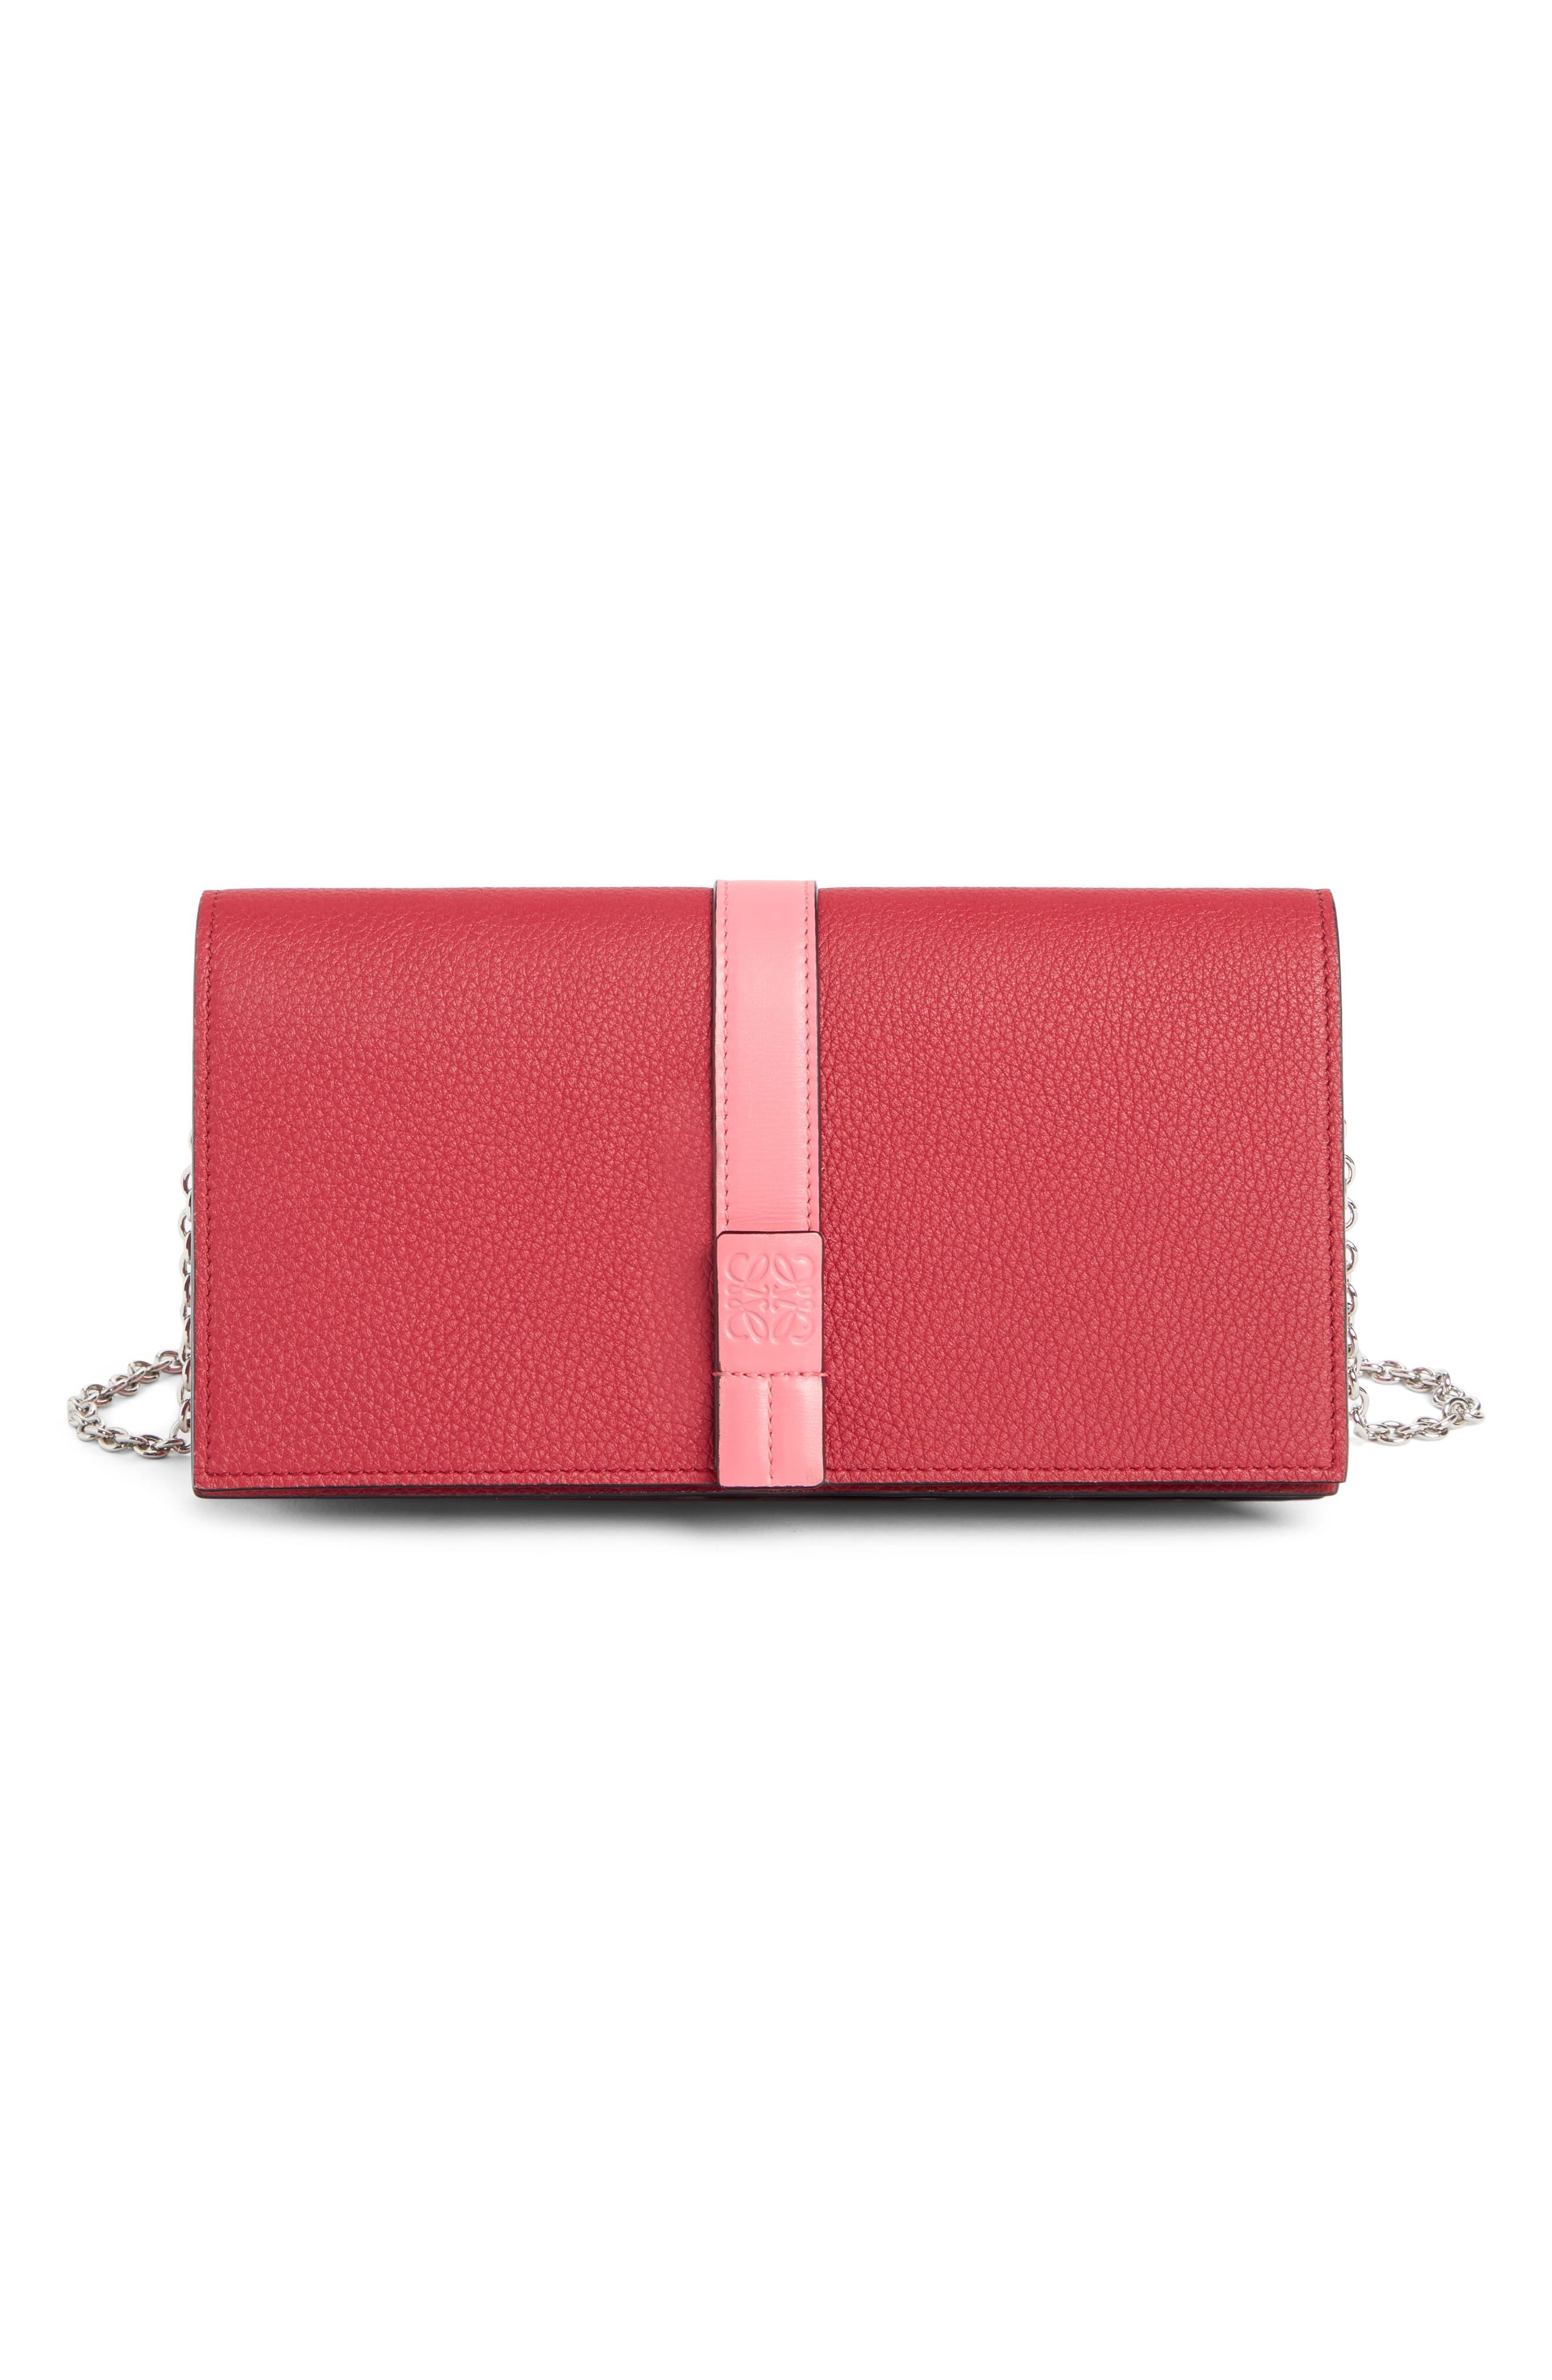 Loewe Leather Wallet On A Chain in Pink - Lyst